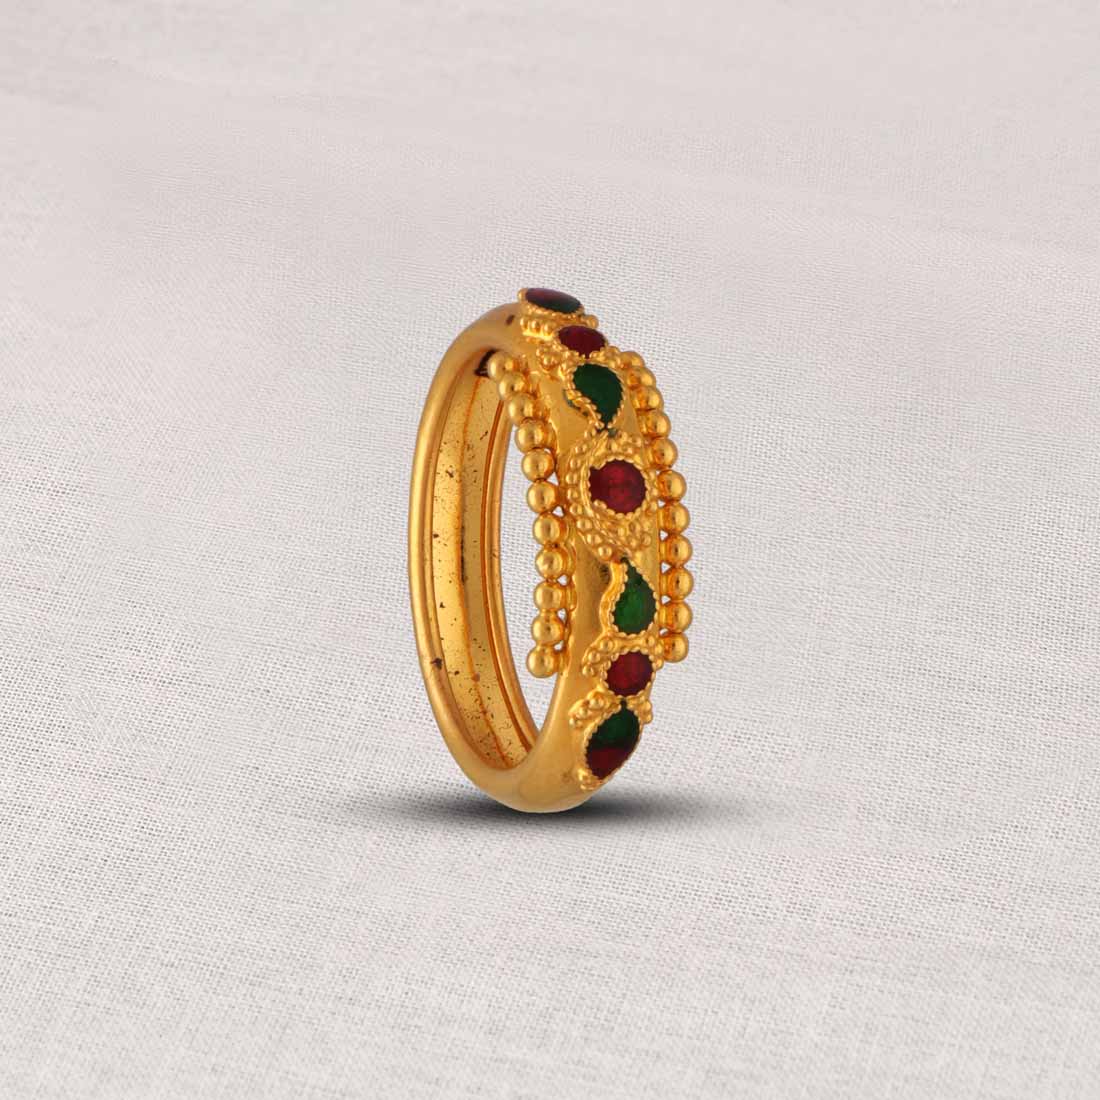 Buy Simple Gold Ring Online In India - Etsy India